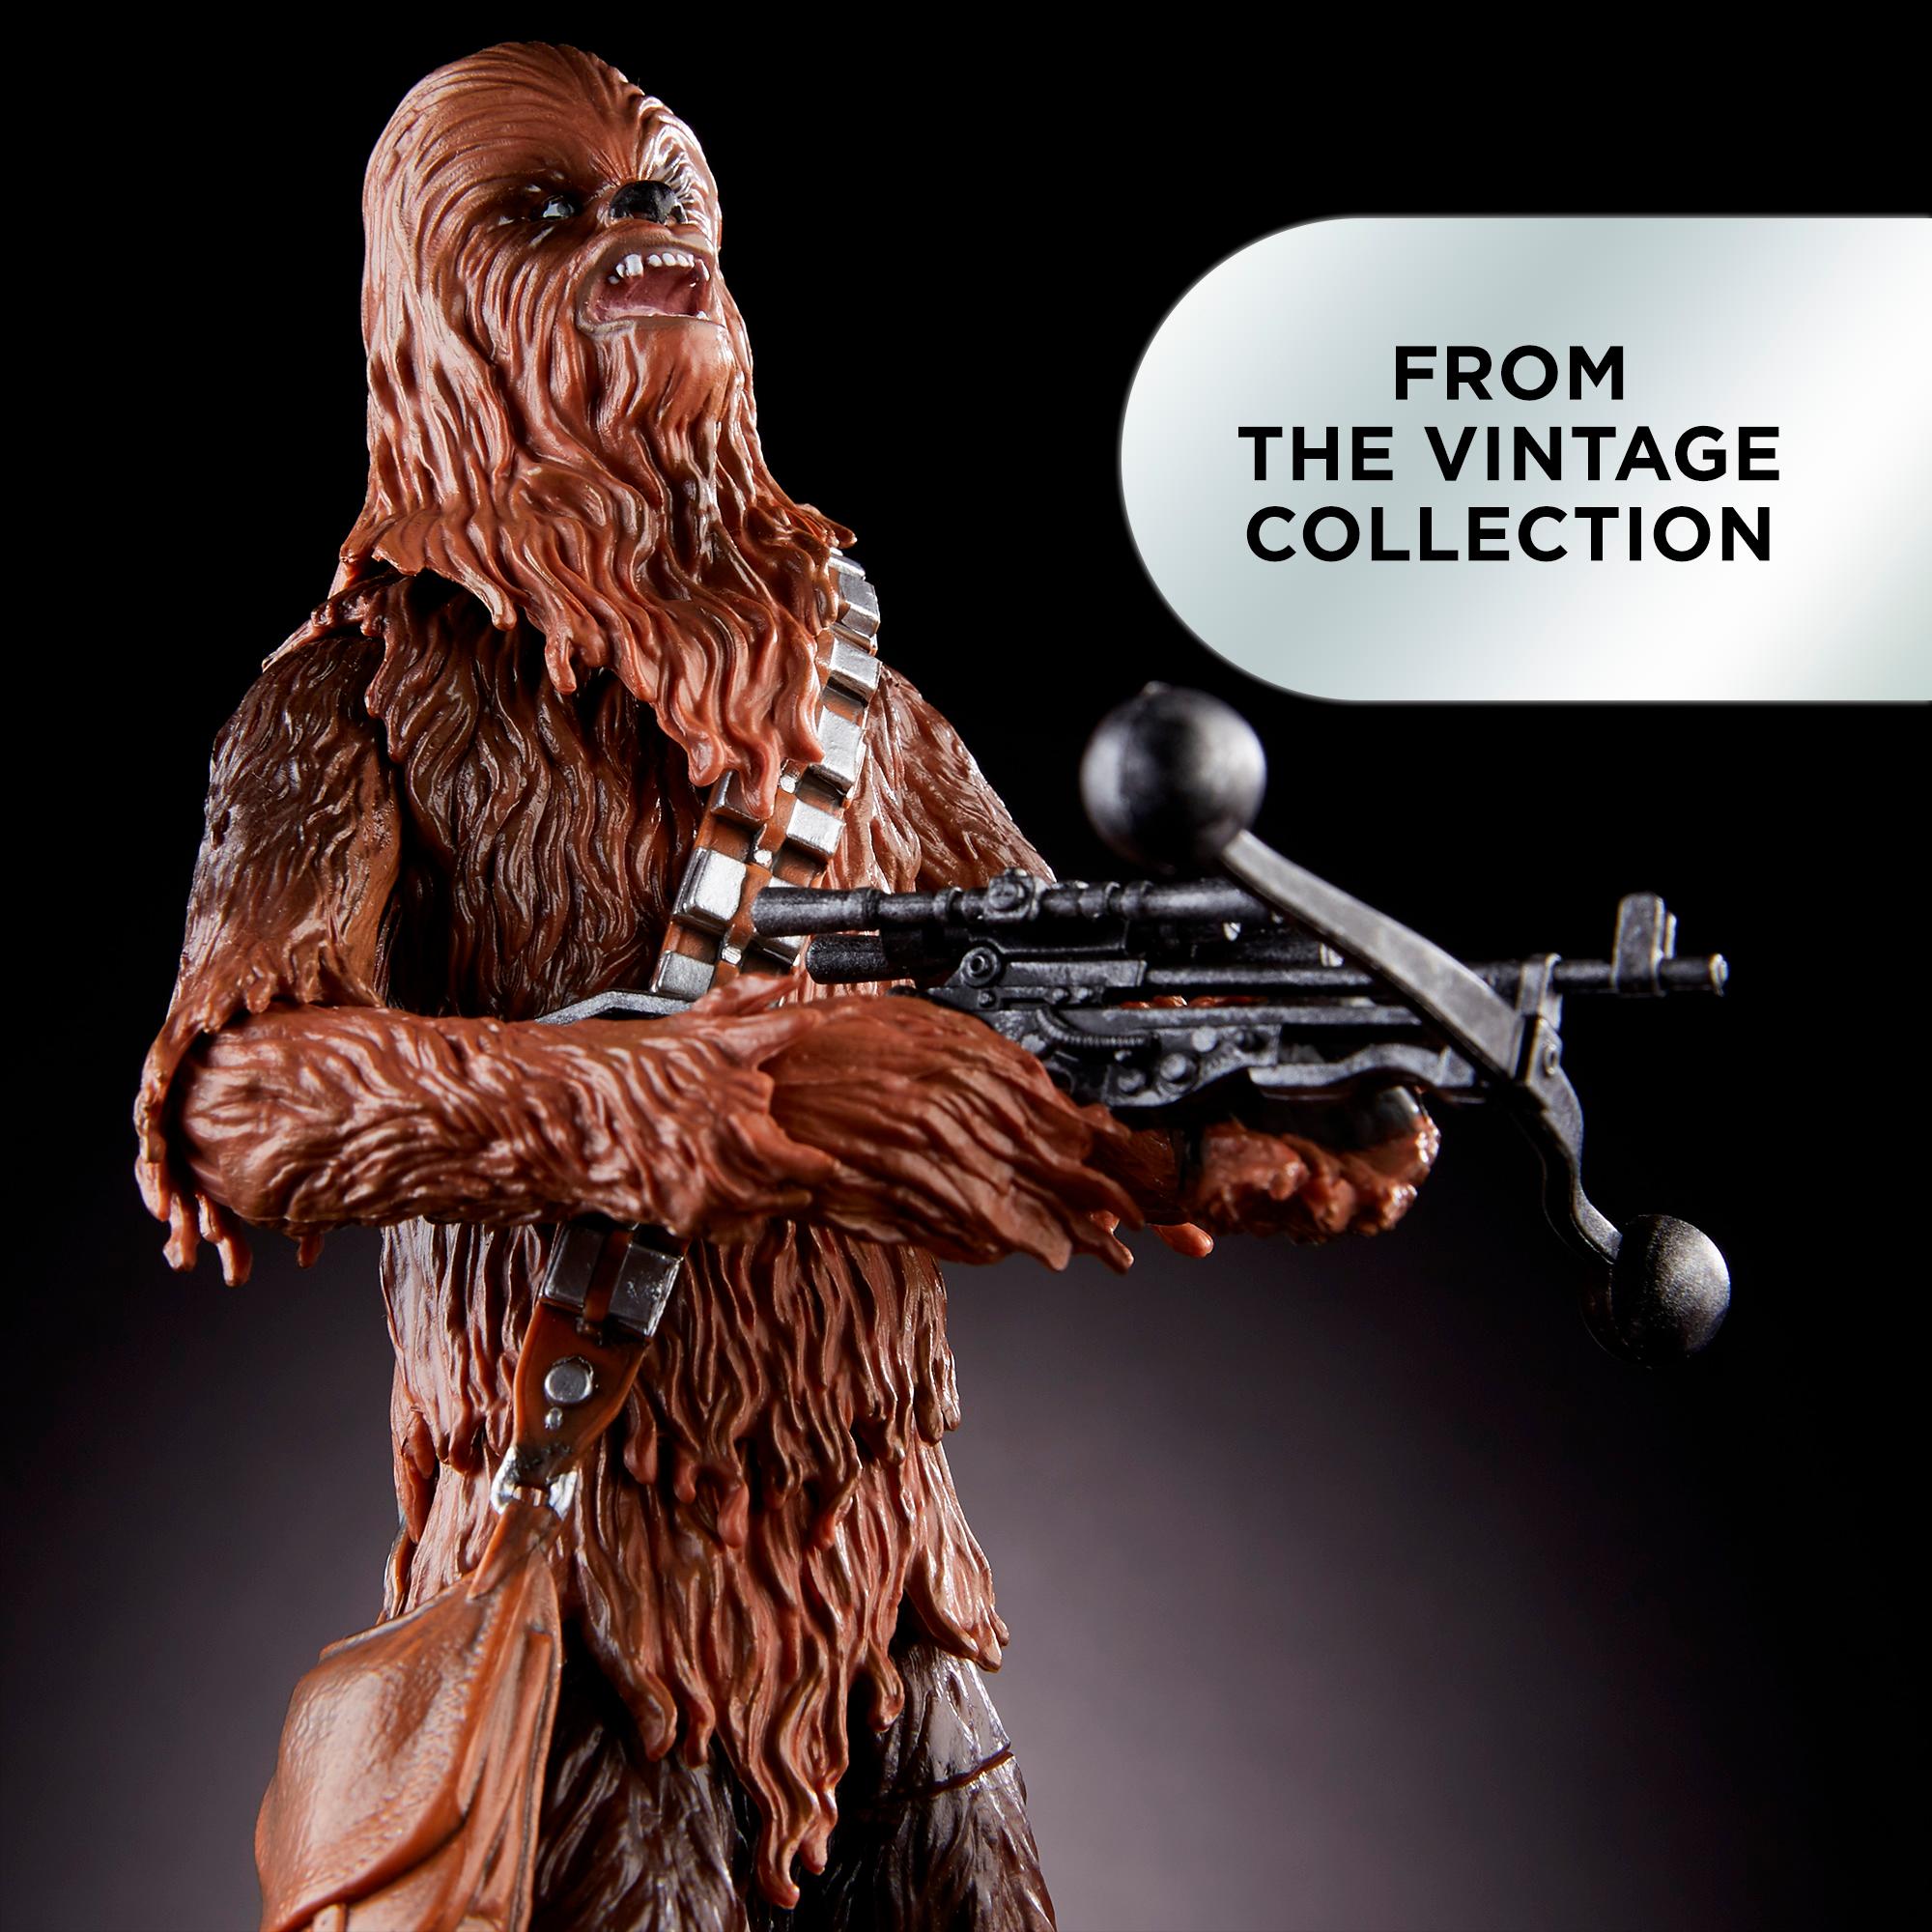 Star Wars The Vintage Collection Chewbacca 3.75 Inch Action Figure VC 141 MIB 